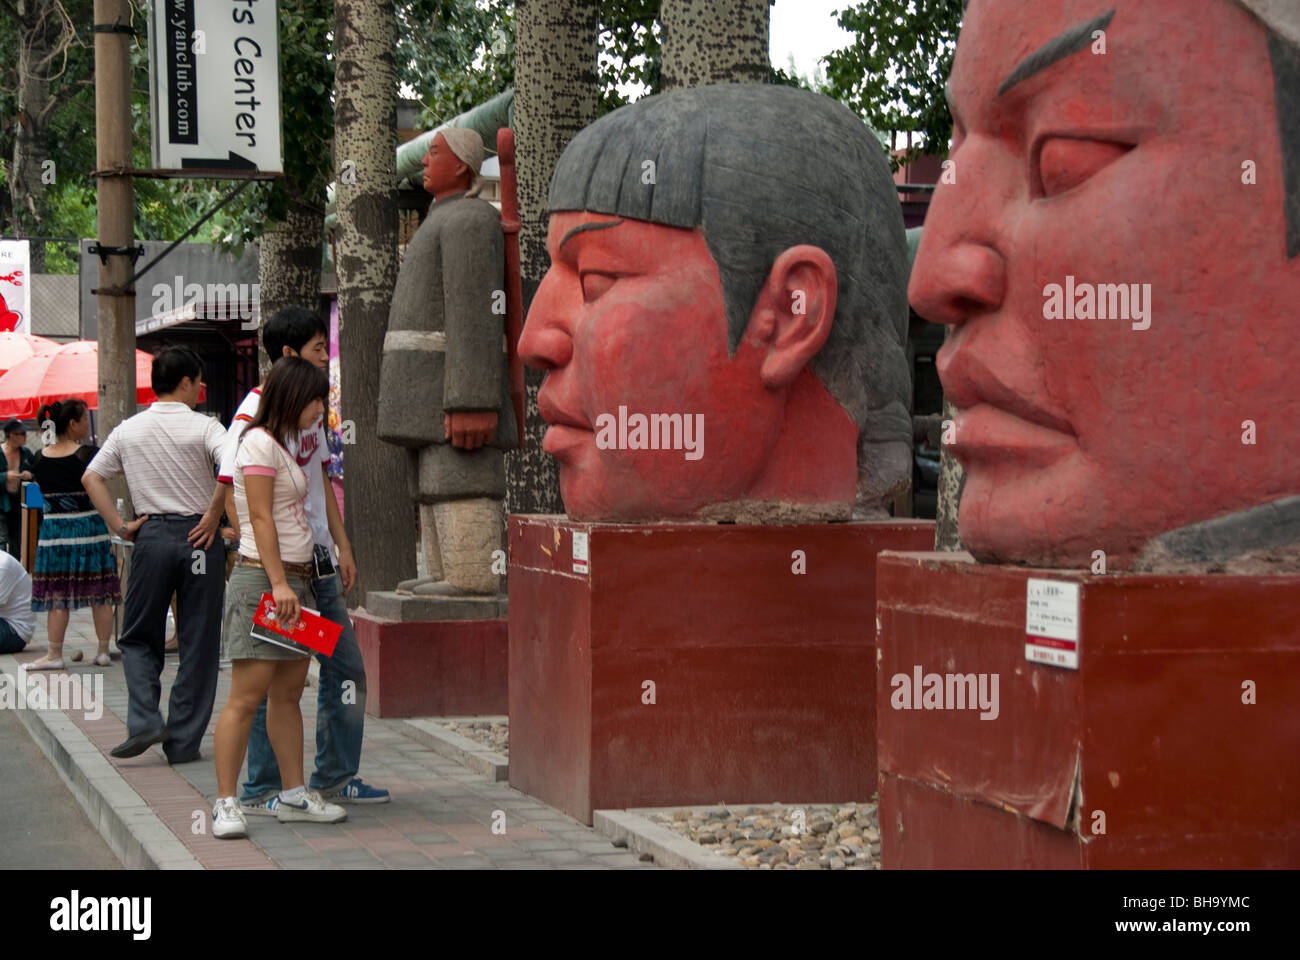 Beijing, CHINA- Chinese Contemporary Art on Display in 798 Art Factory, Teen Couple Visiting Modern Art Sculpture Outside, art outdoor Stock Photo